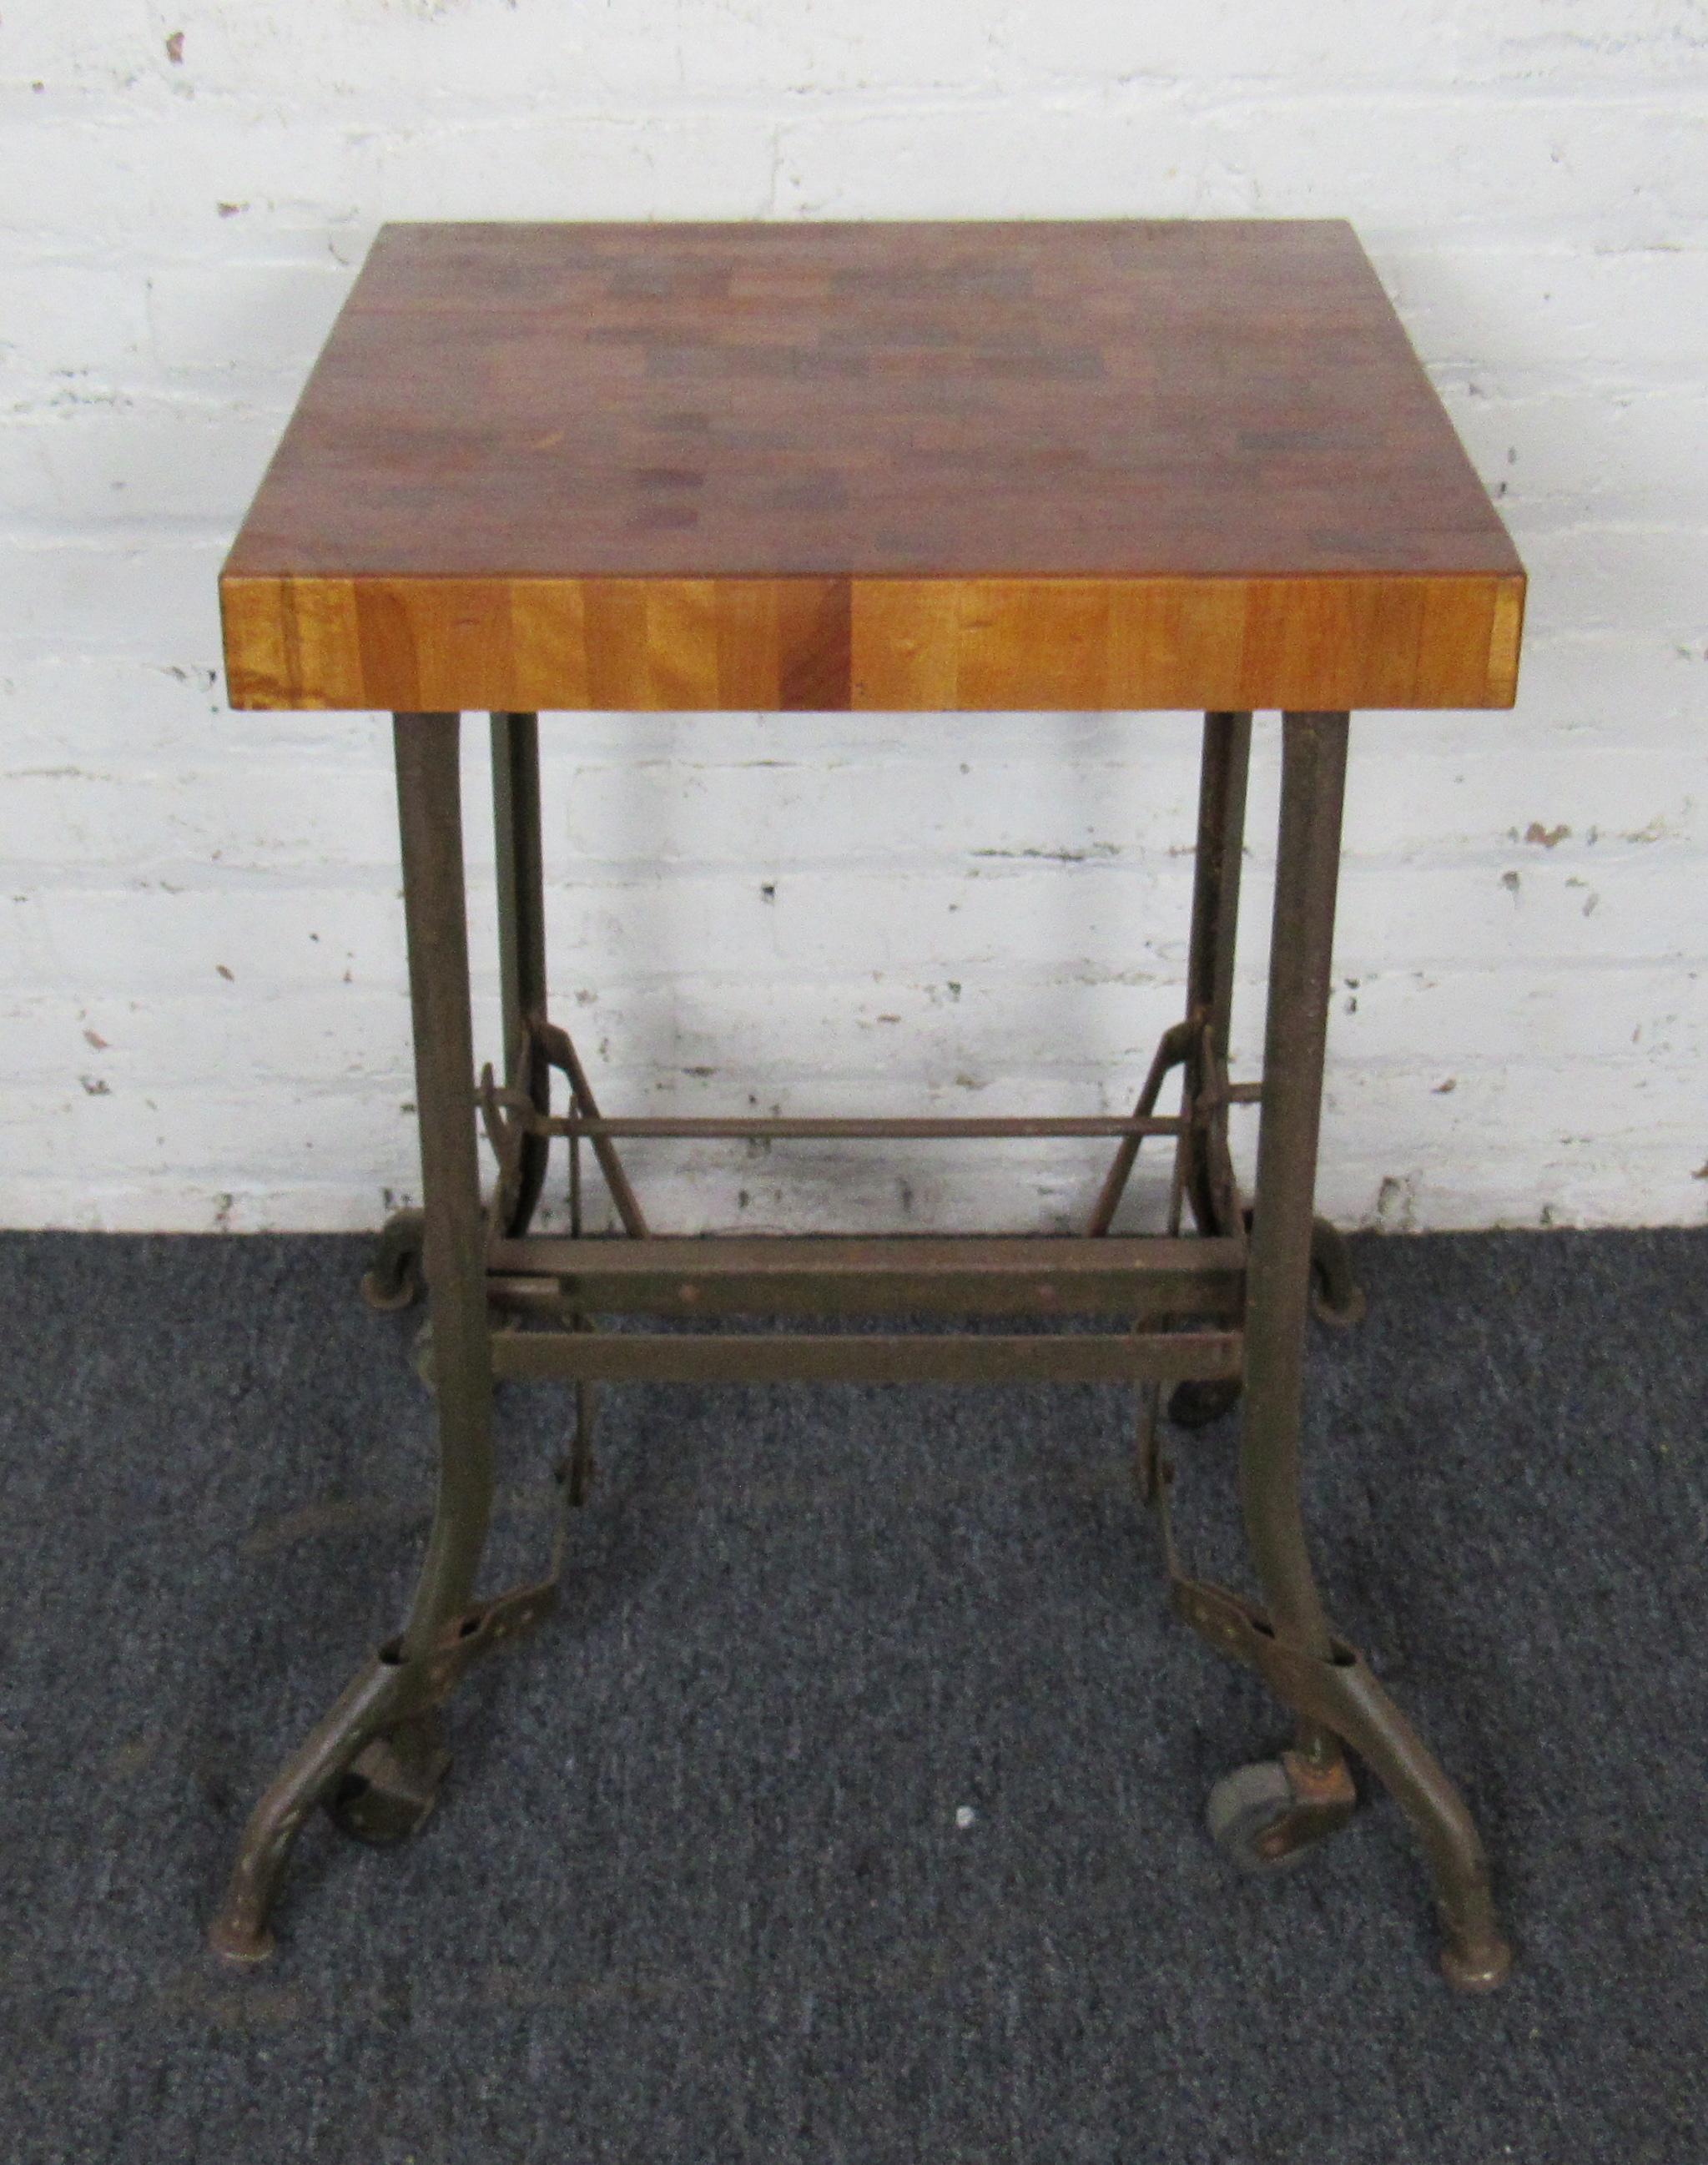 An unusual midcentury table that combines a sturdy butcher block top with a wheeled base. This vintage piece is versatile for home projects or living spaces and is sure to stand out anywhere.

Please confirm item location with dealer. (NJ/NY).